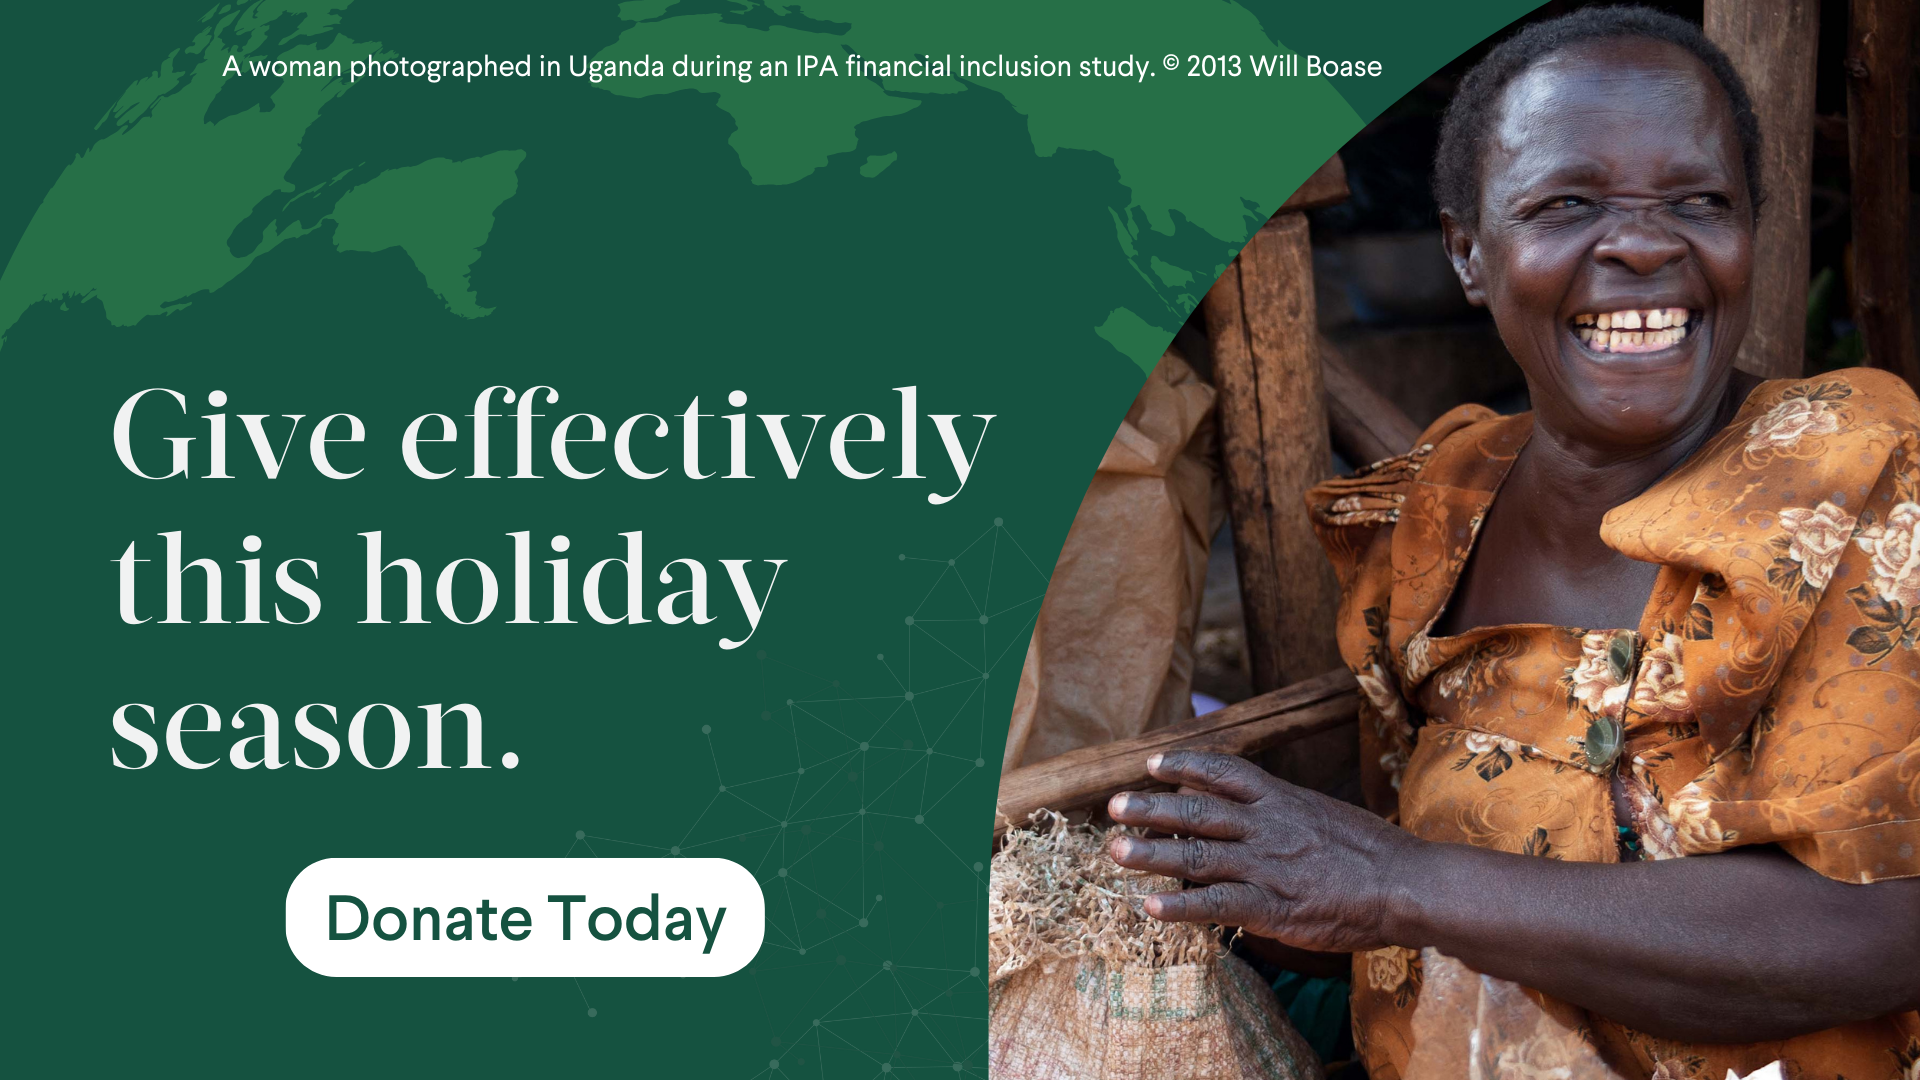 Image banner with an IPA photo of a woman in Uganda, next to the text "Give effectively this holiday season - donate today"